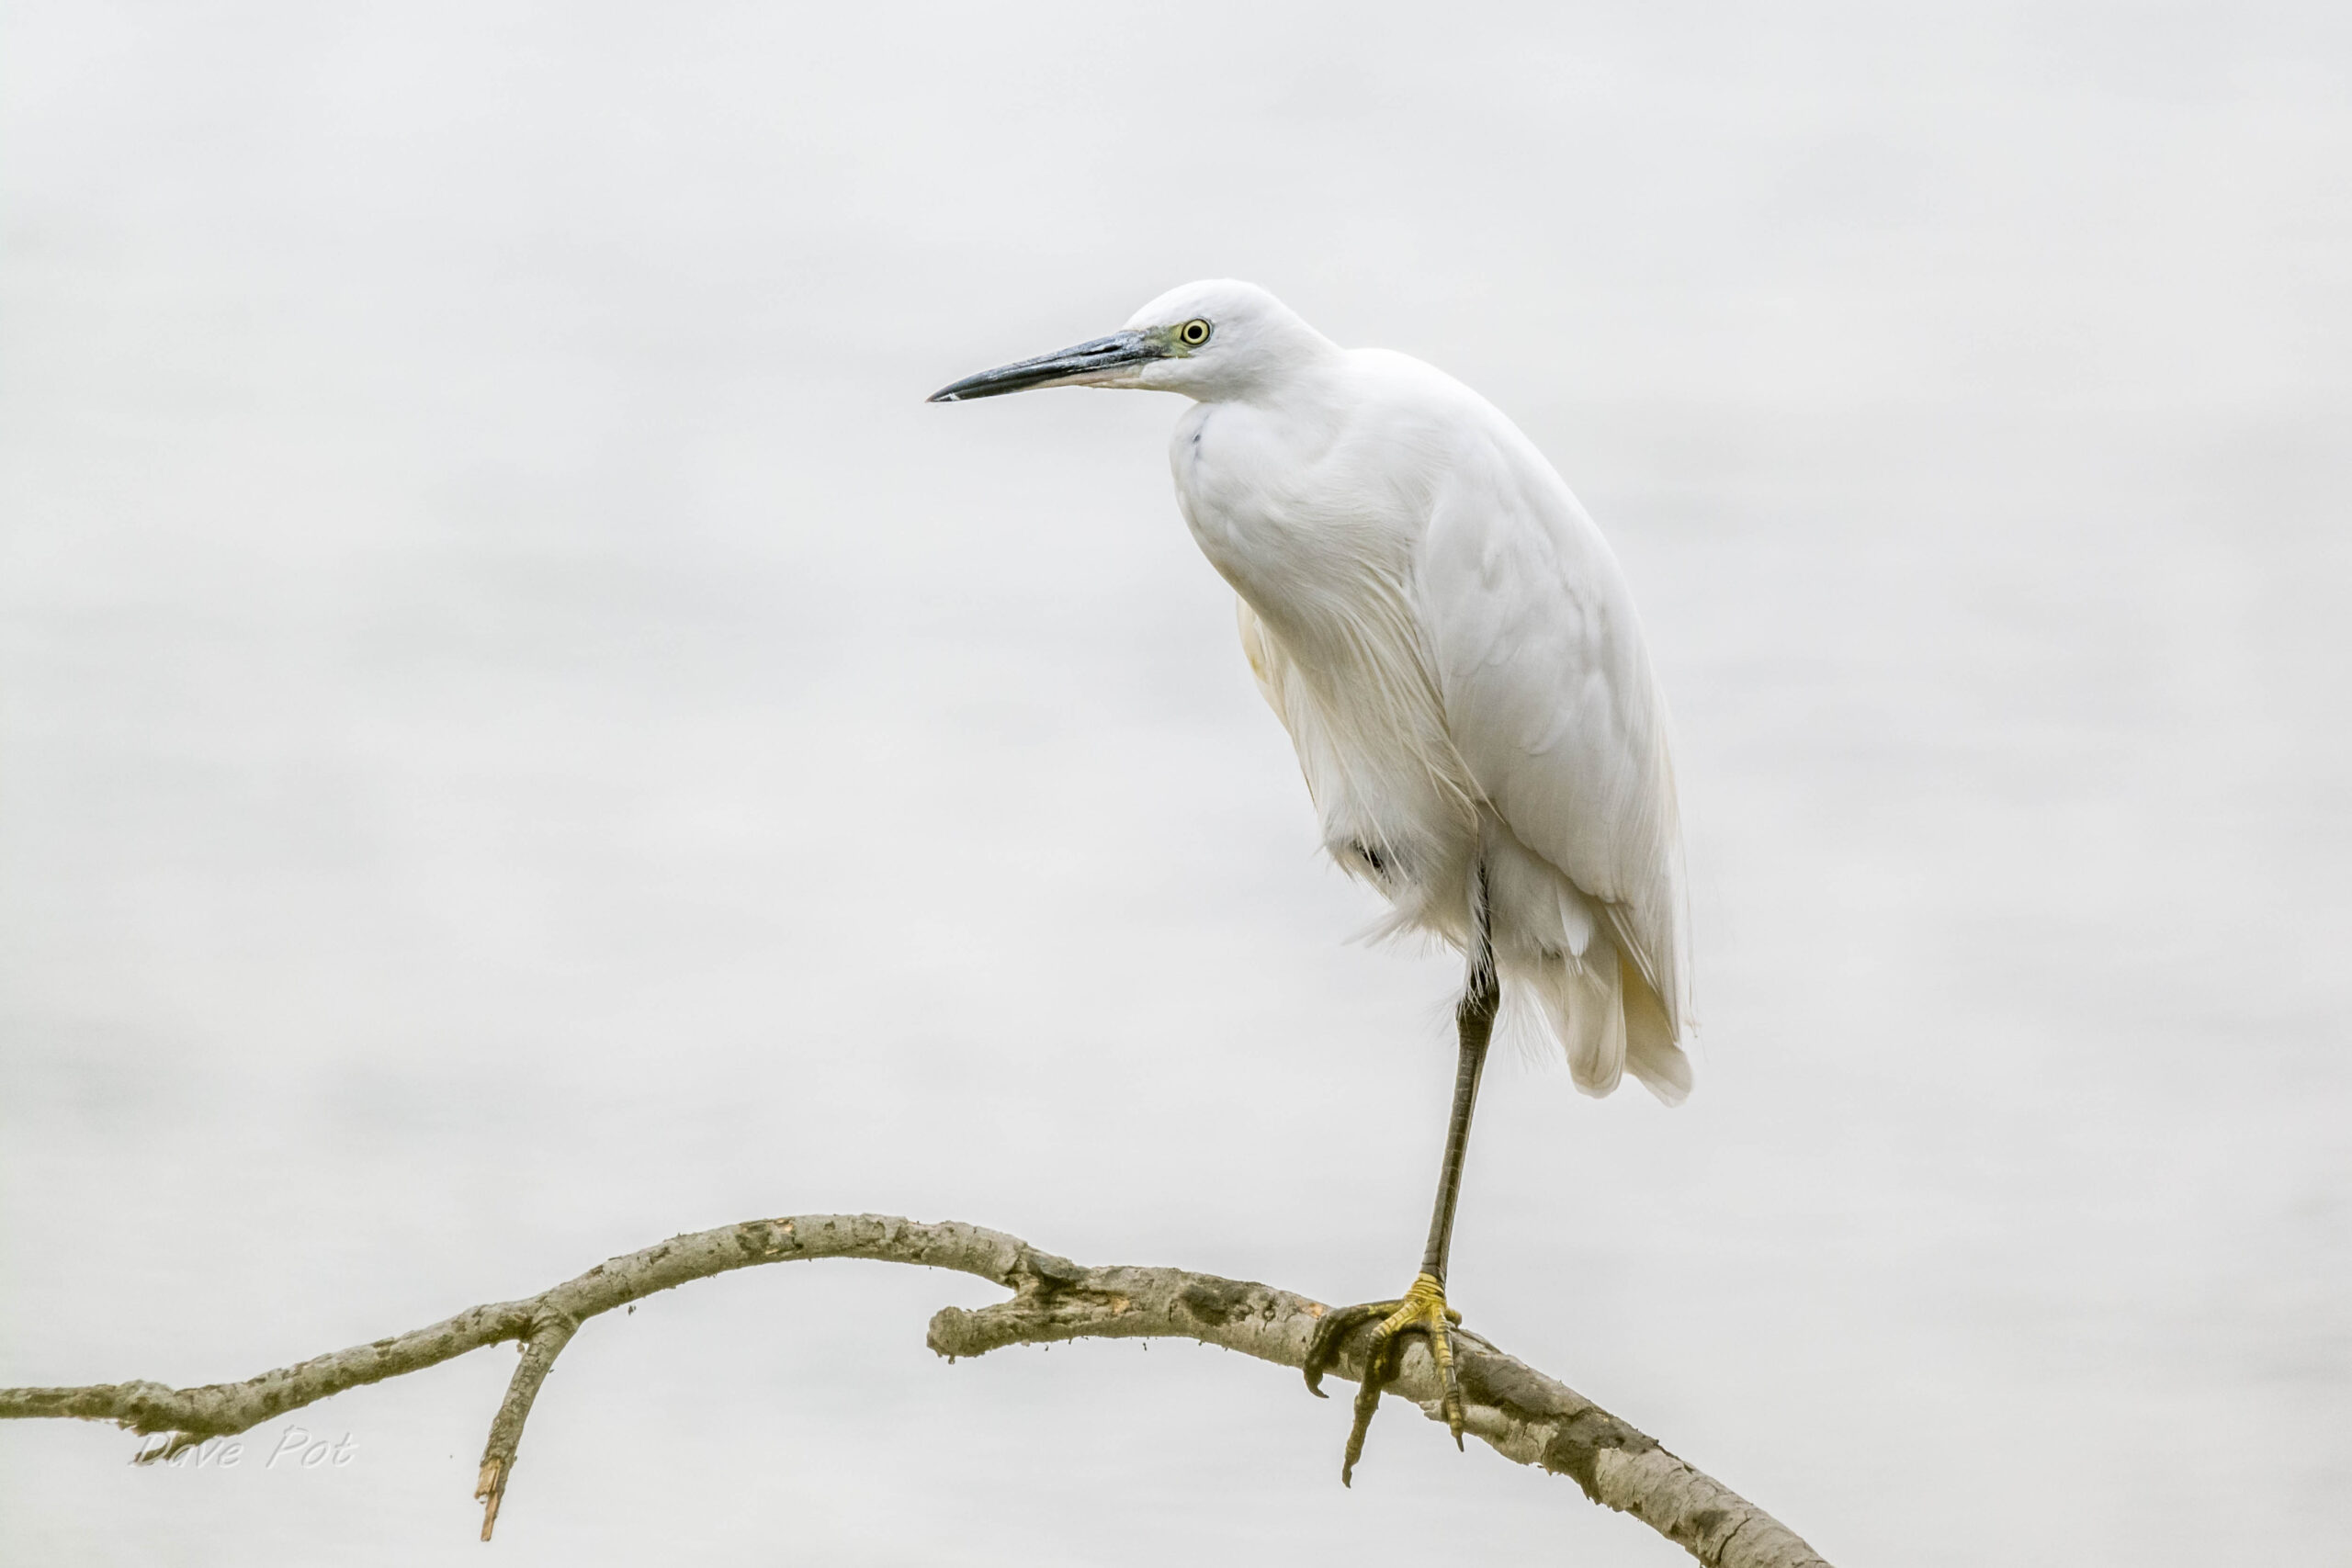 Image of a white egret standing upon a branch against a white landscape